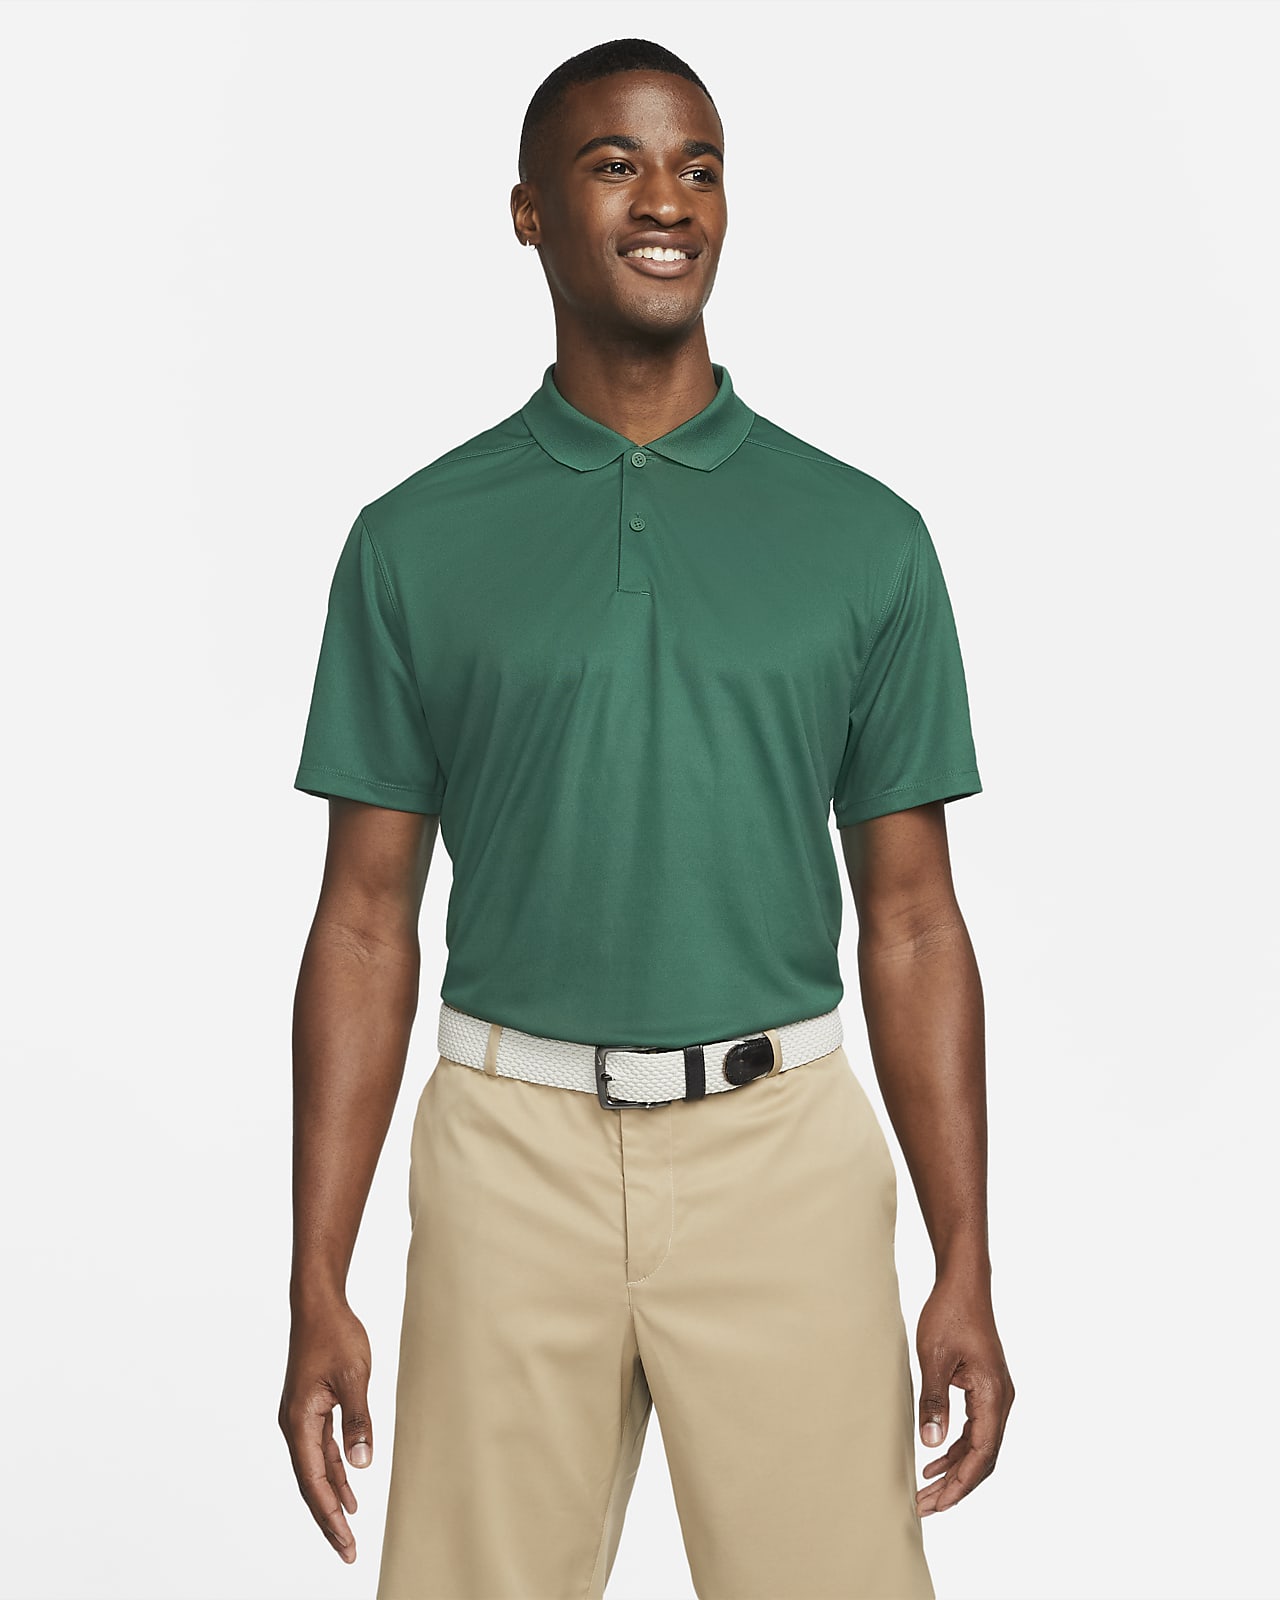 Nike Golf Dri-FIT Custom Logo Embroidered Players Polo Shirt - For Men